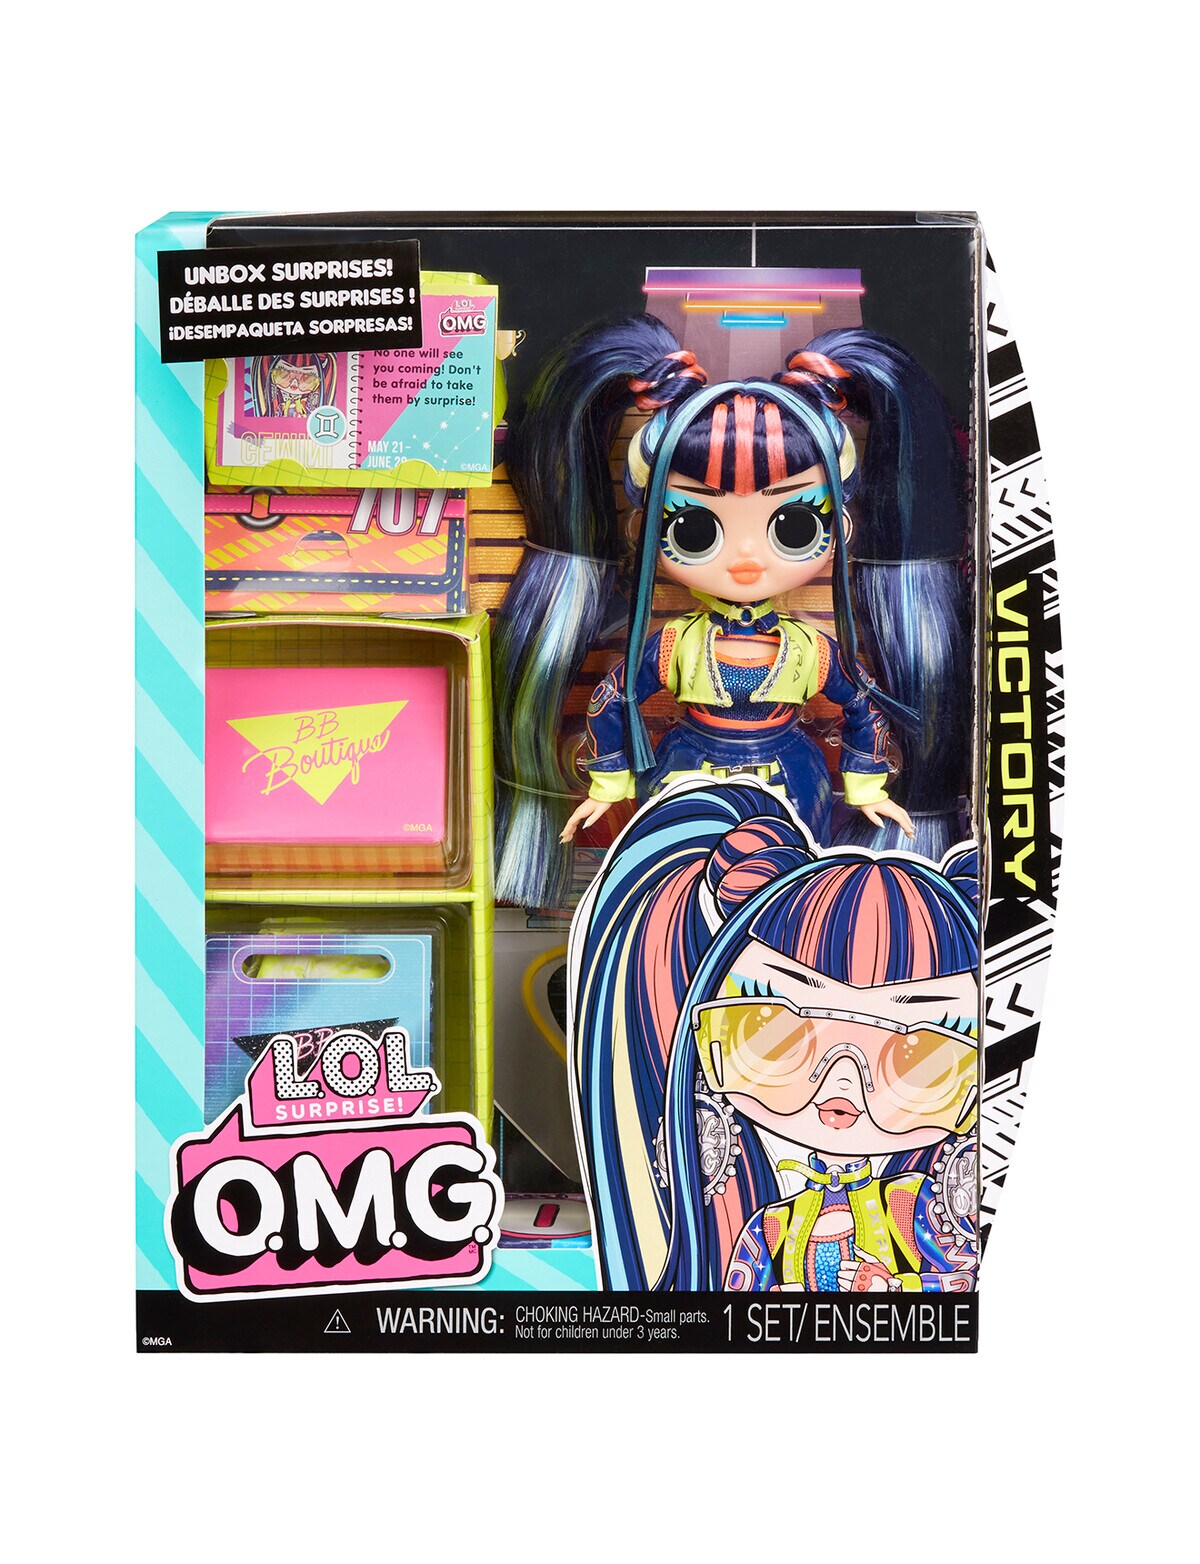 L.O.L. Surprise! O.M.G. Fashion Club mobile game available now